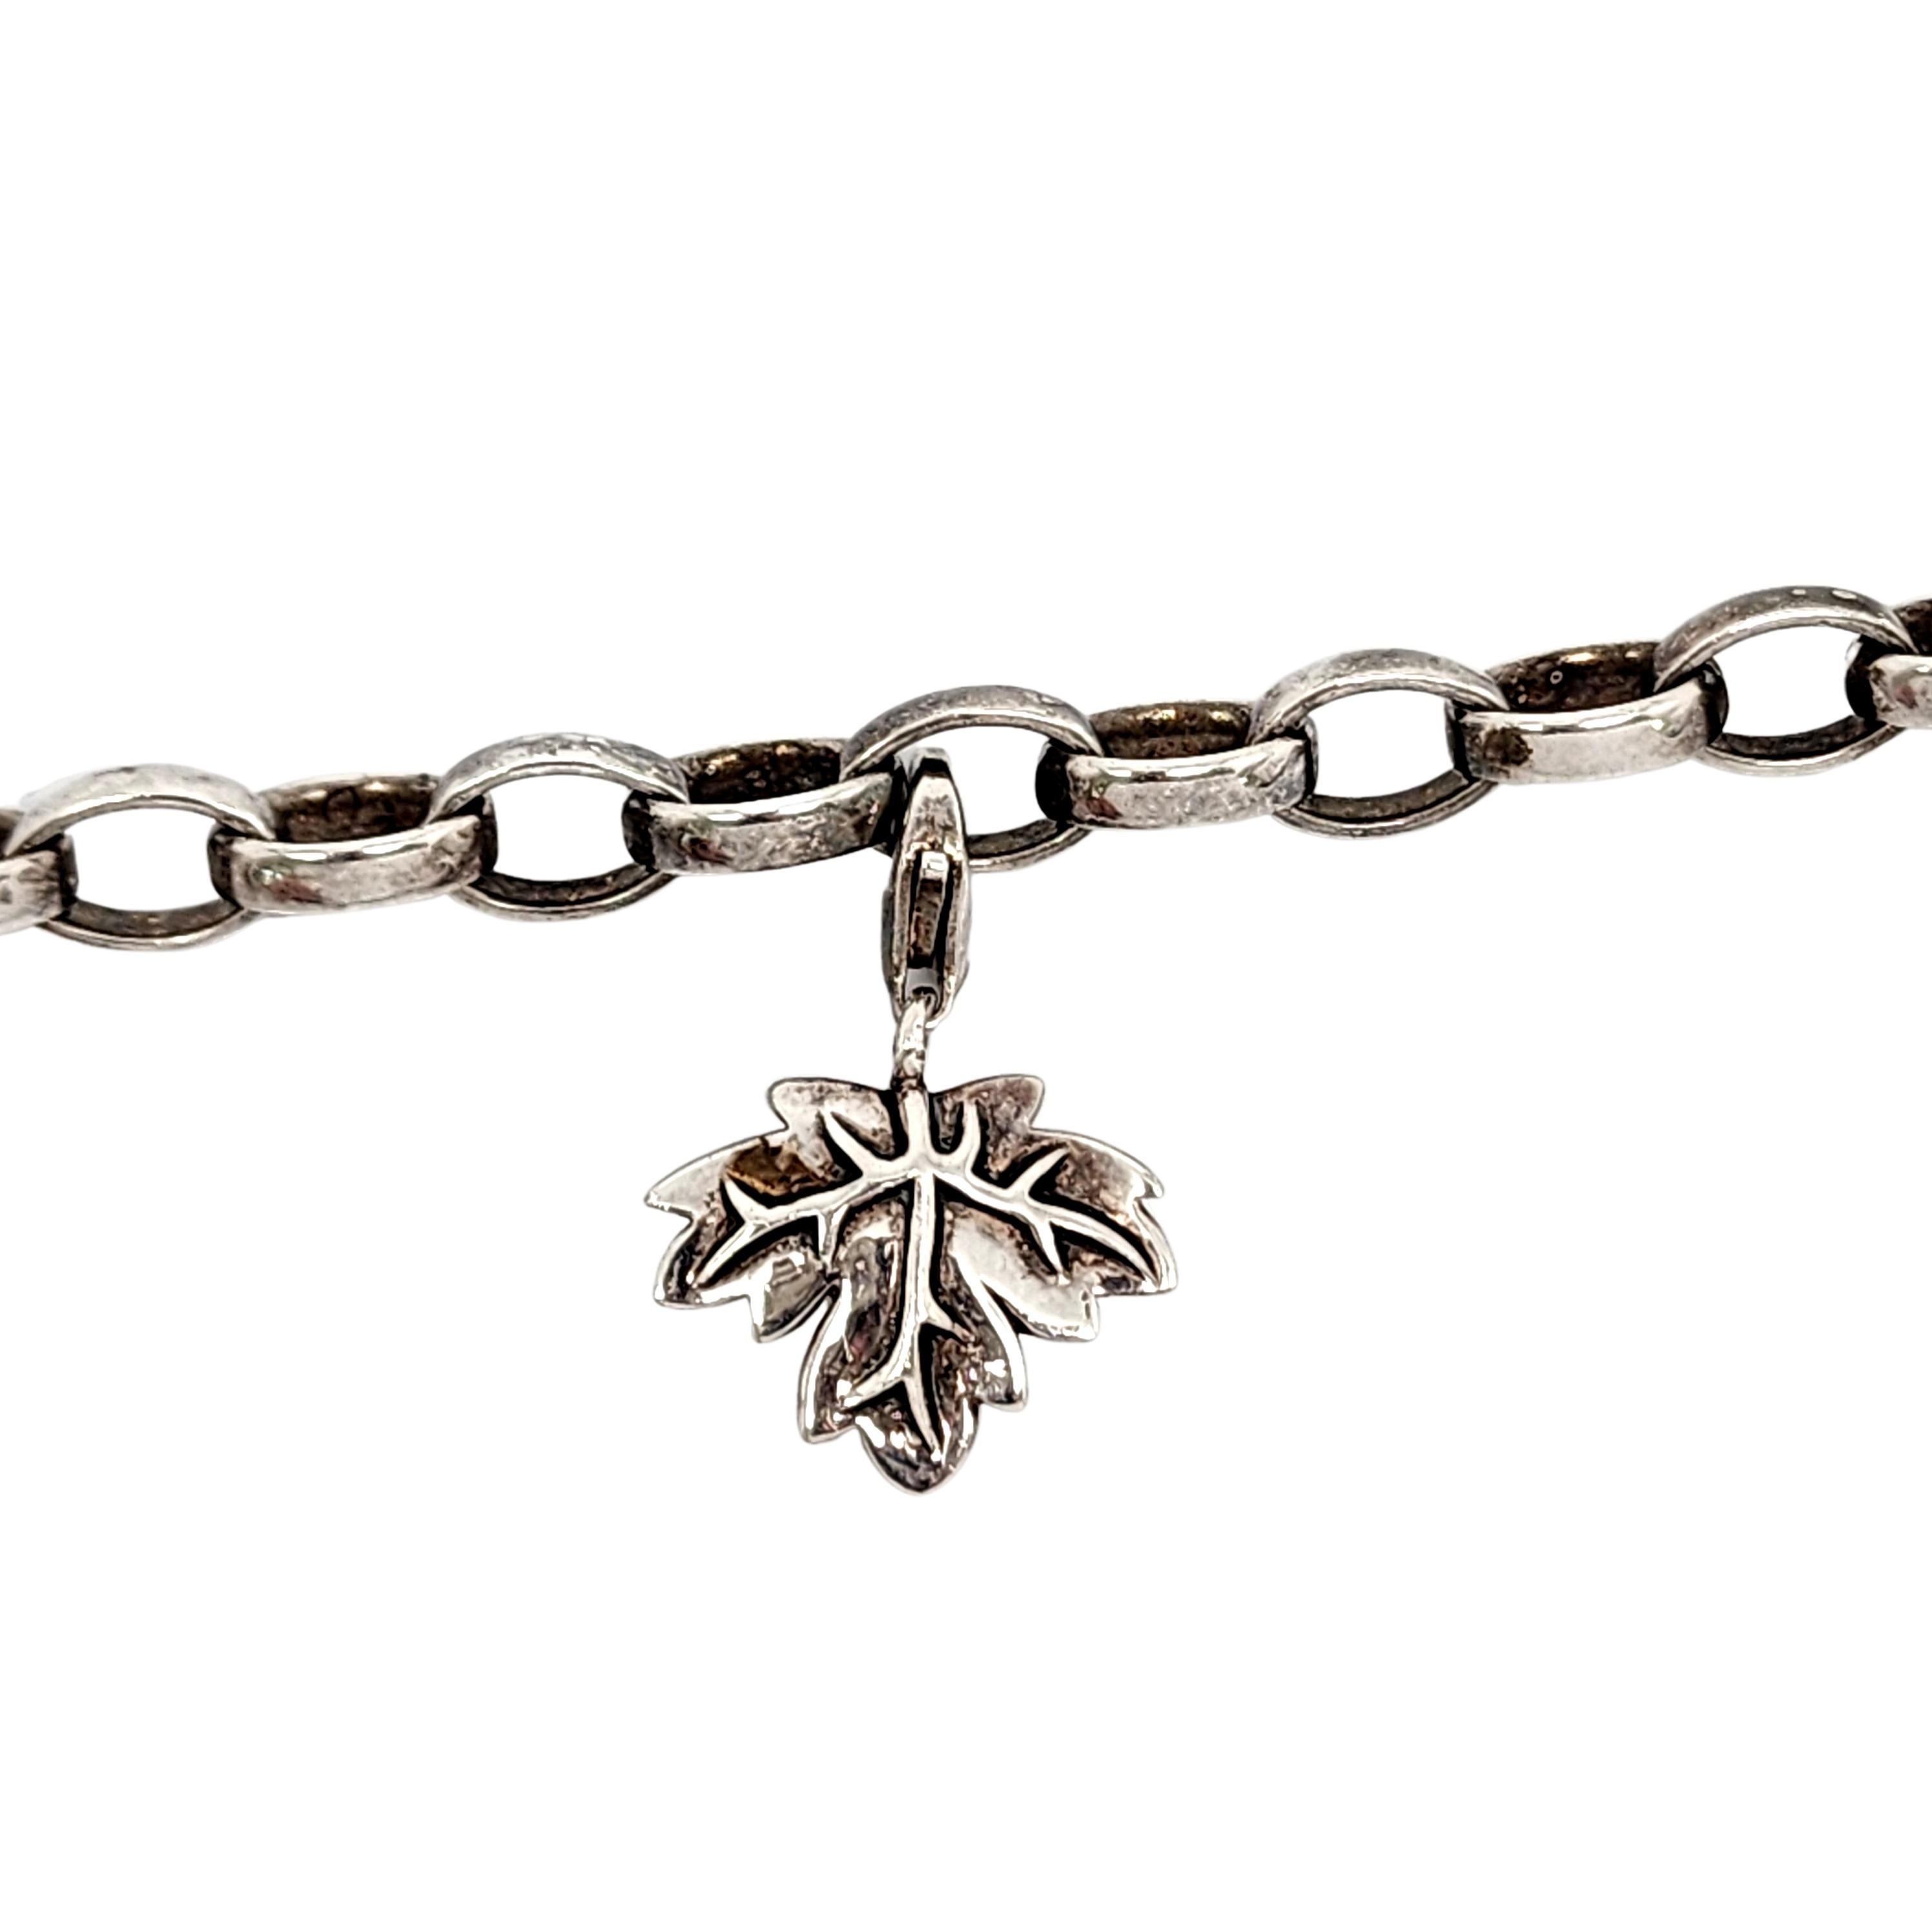 Thomas Sabo Charm Club SS Bracelet with Soccer Ball and Leaf Charms #14459 In Good Condition For Sale In Washington Depot, CT